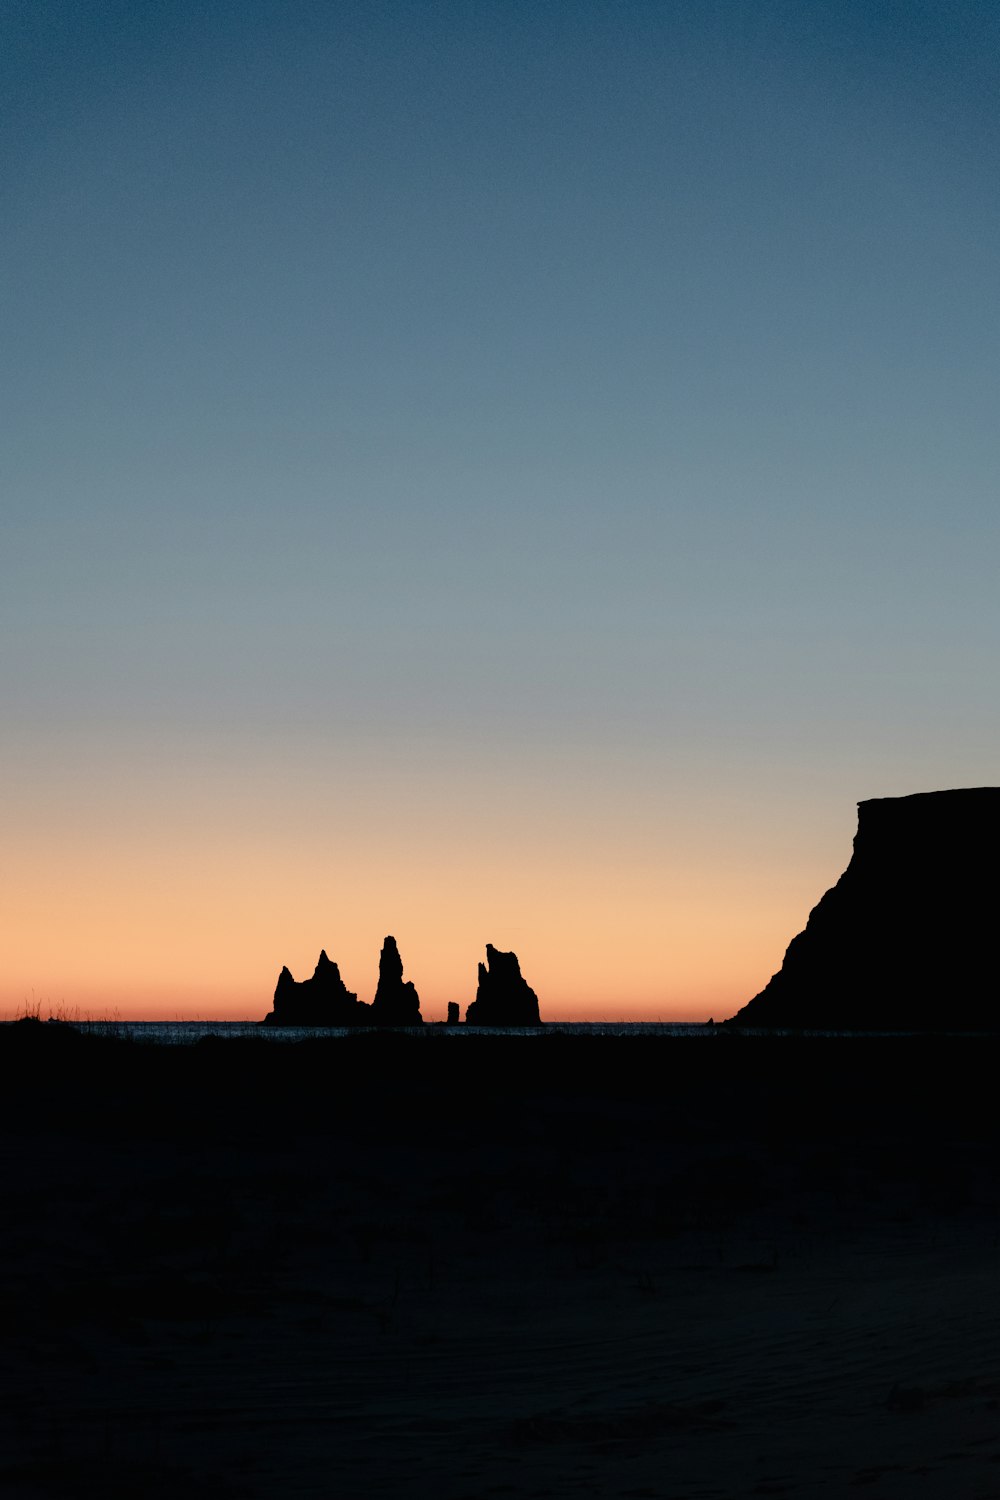 silhouette of people sitting on a rock